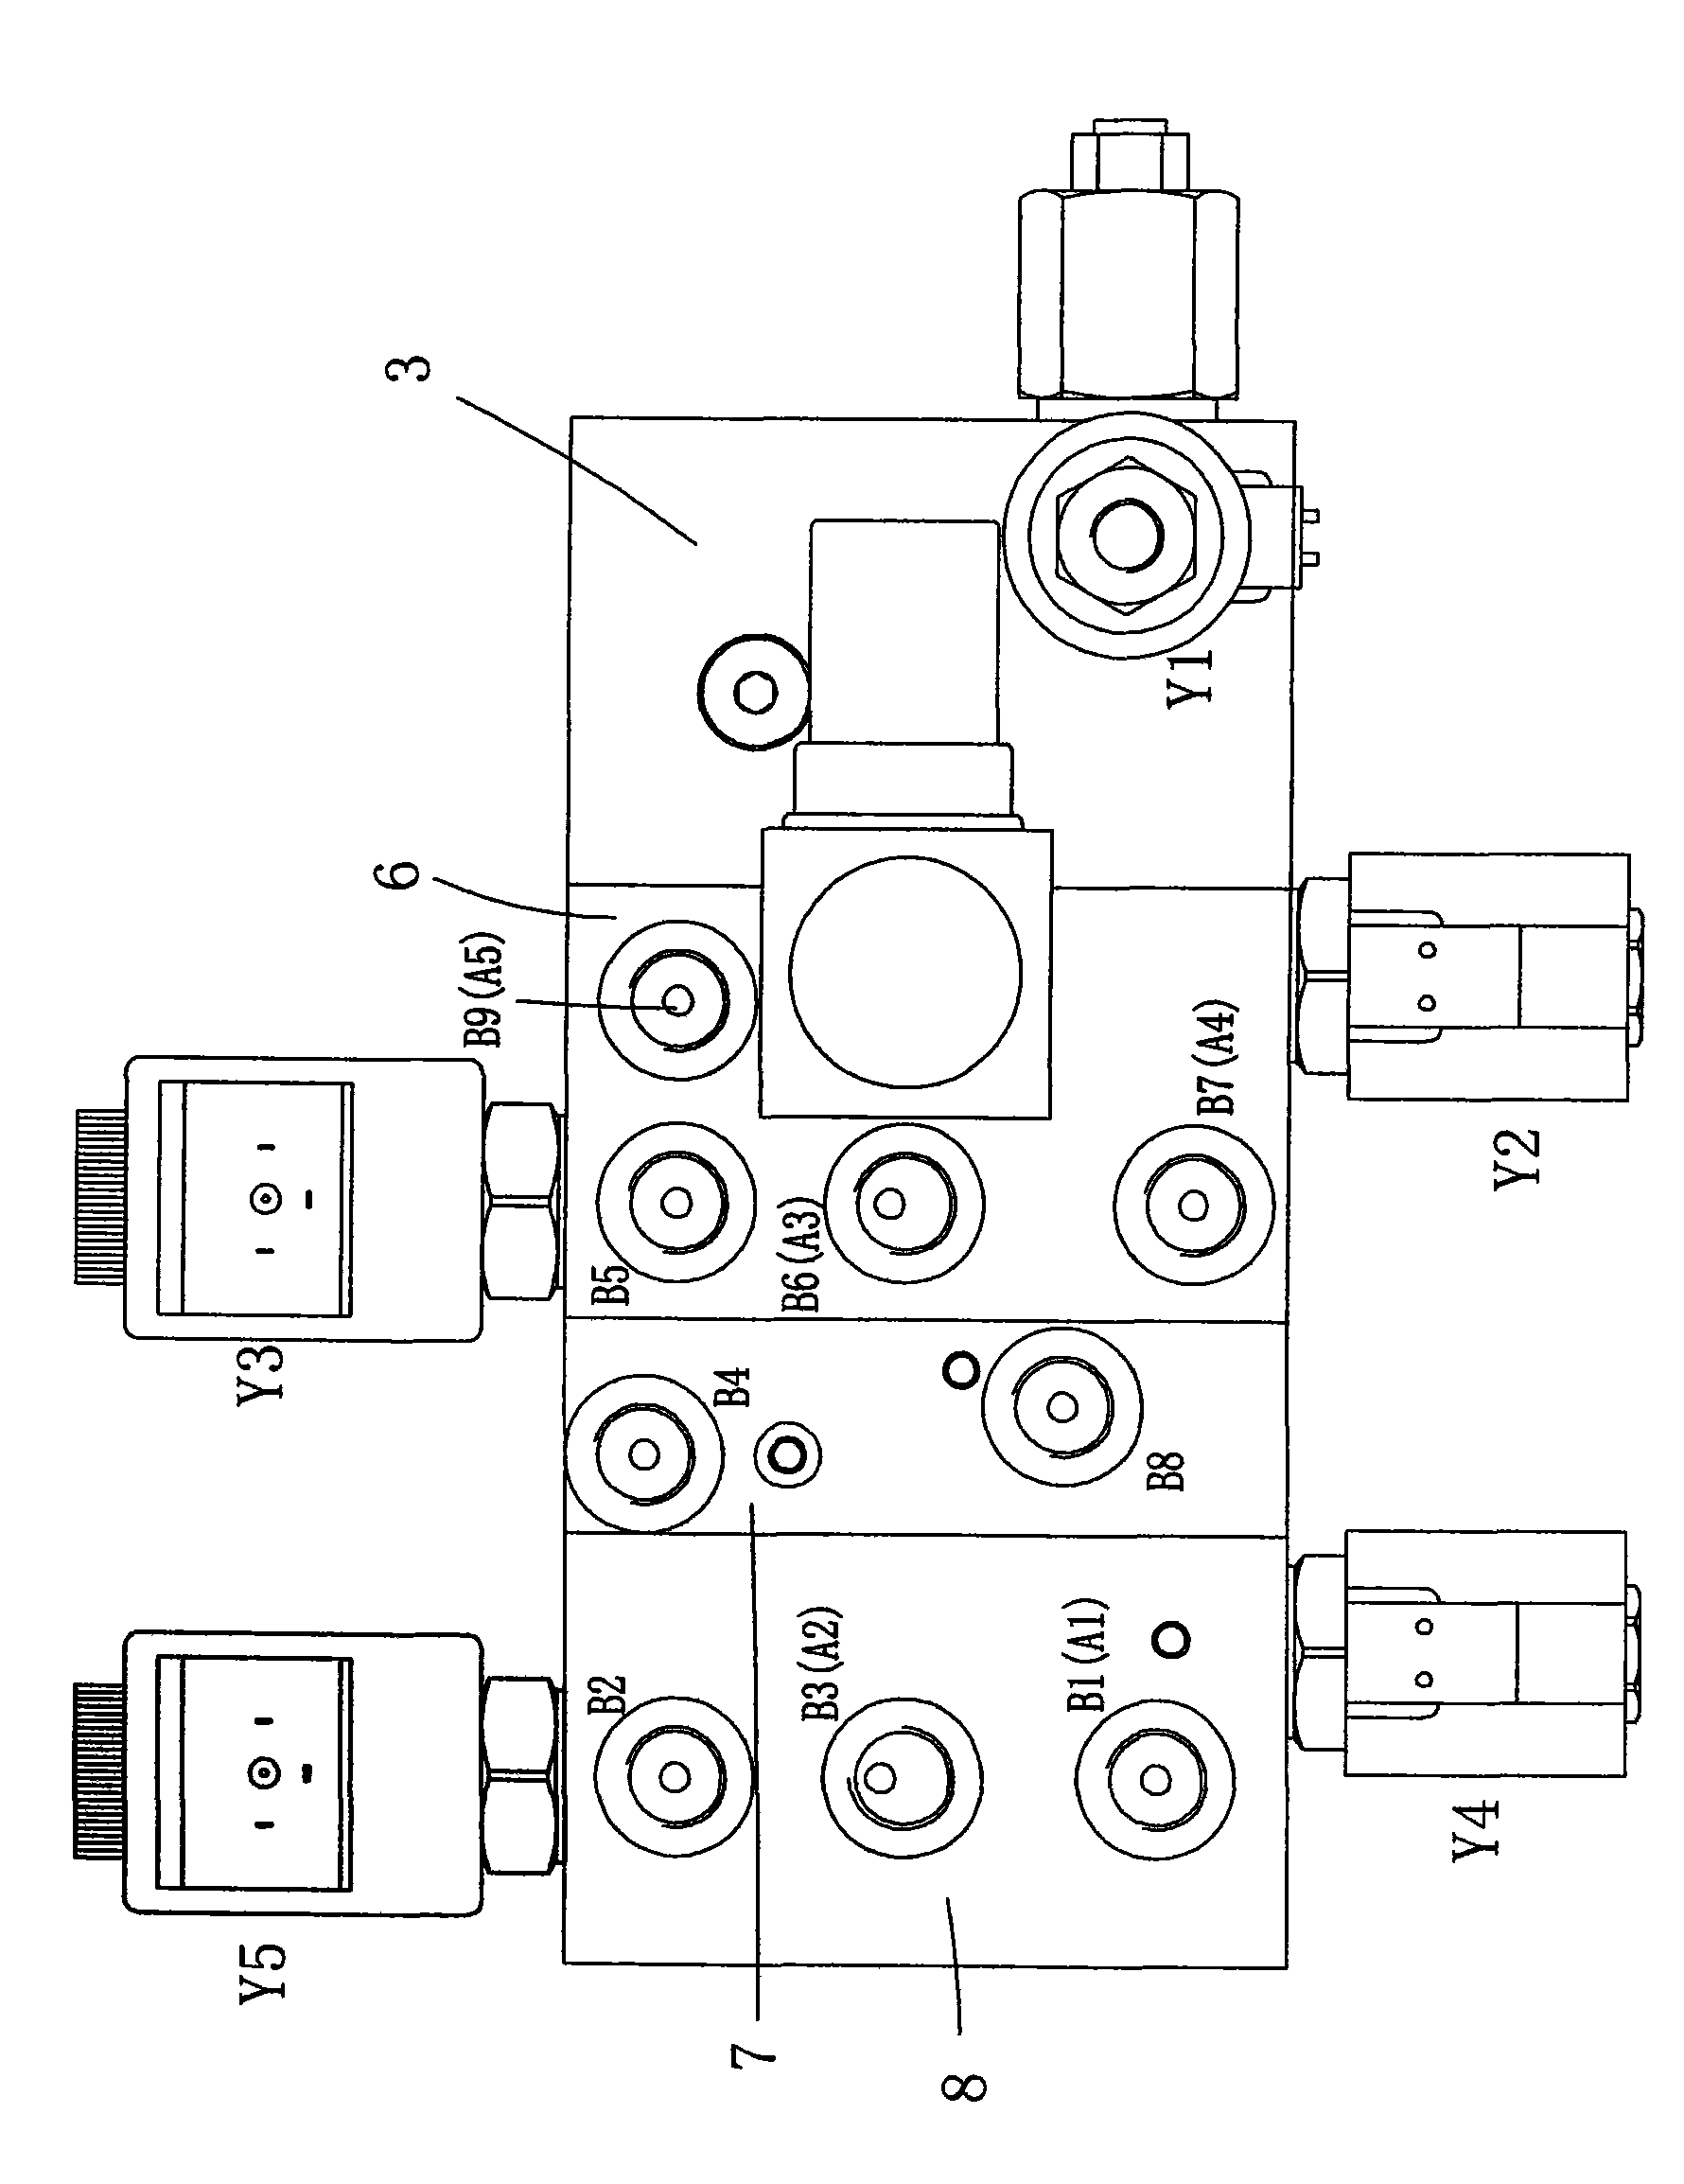 Electrically-controlled multifunctional compact type control valve assembly